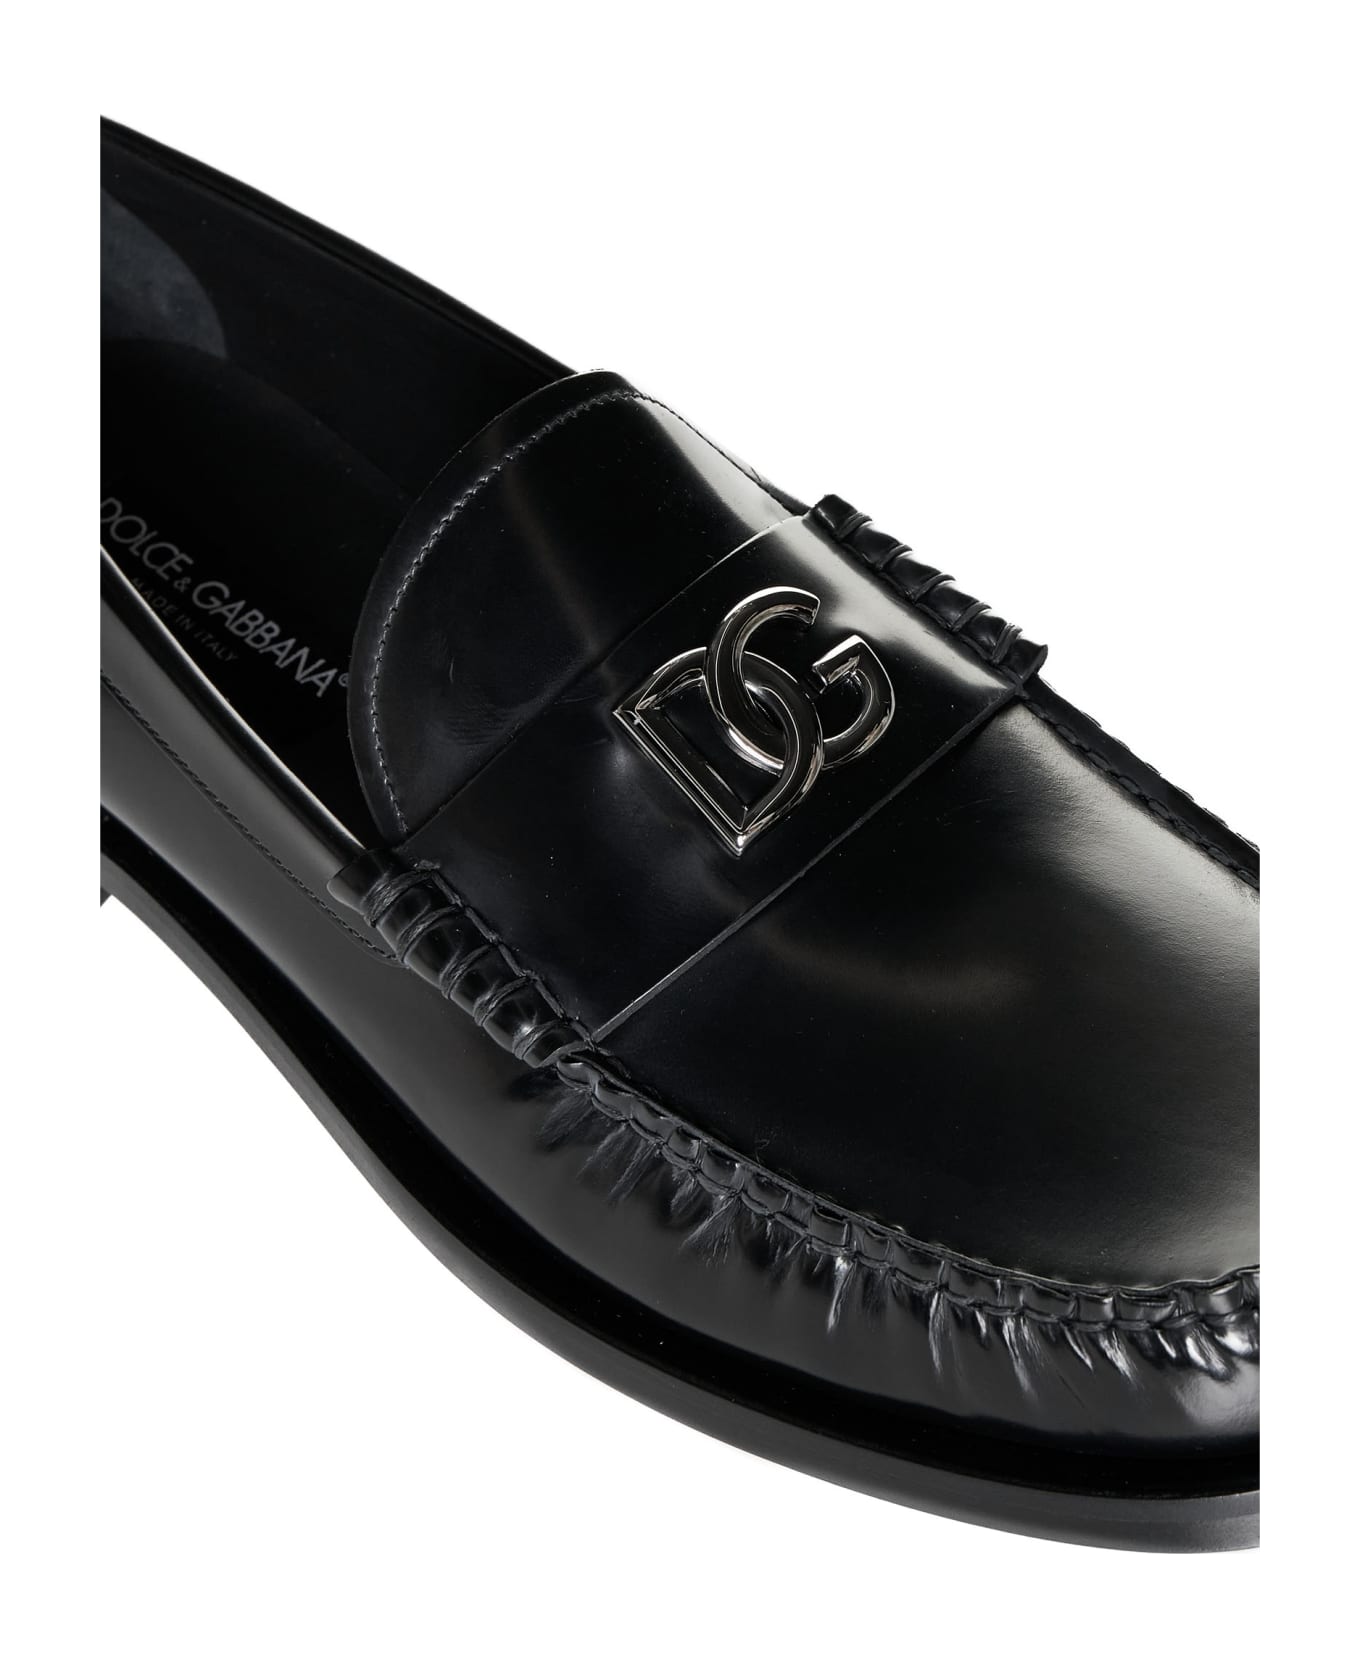 Dolce & Gabbana Leather Loafers - Nero